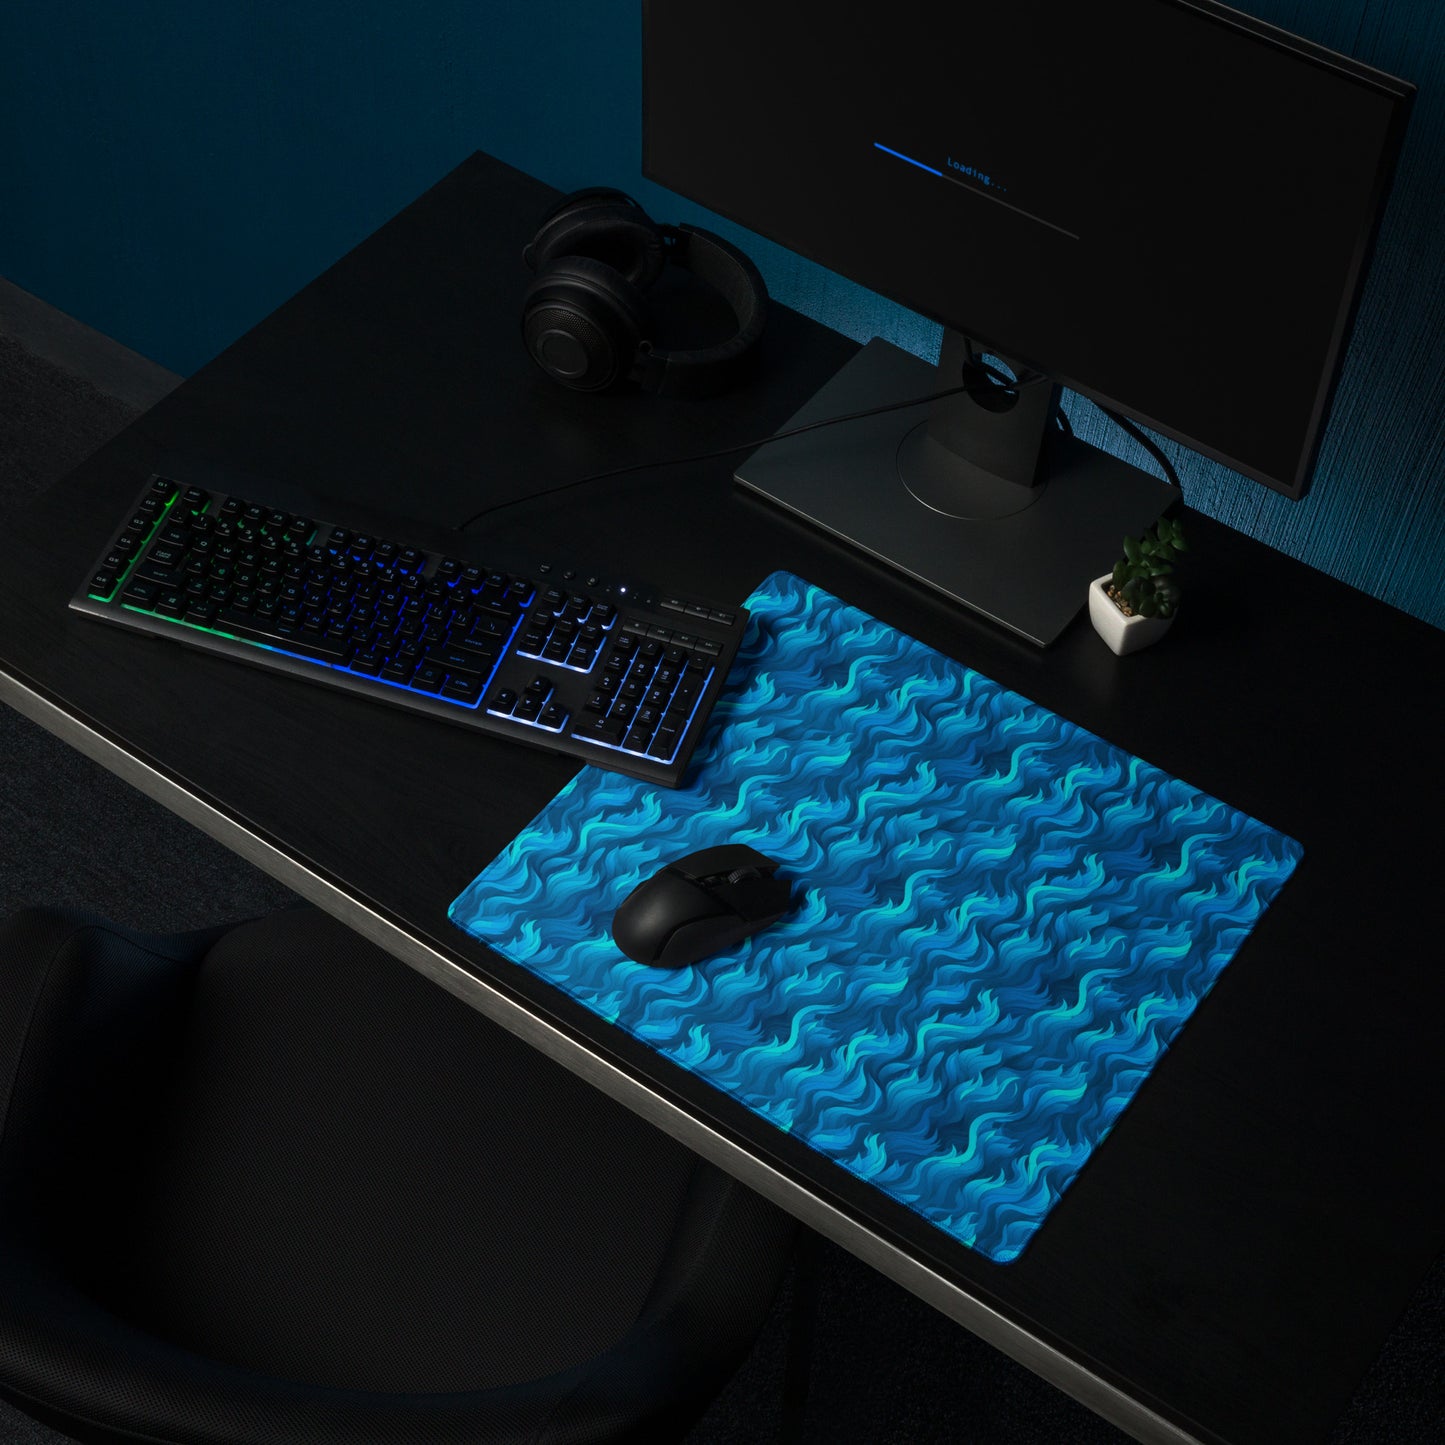 A 18" x 16" desk pad with a wavy flame pattern on it shown on a desk setup. Blue in color.